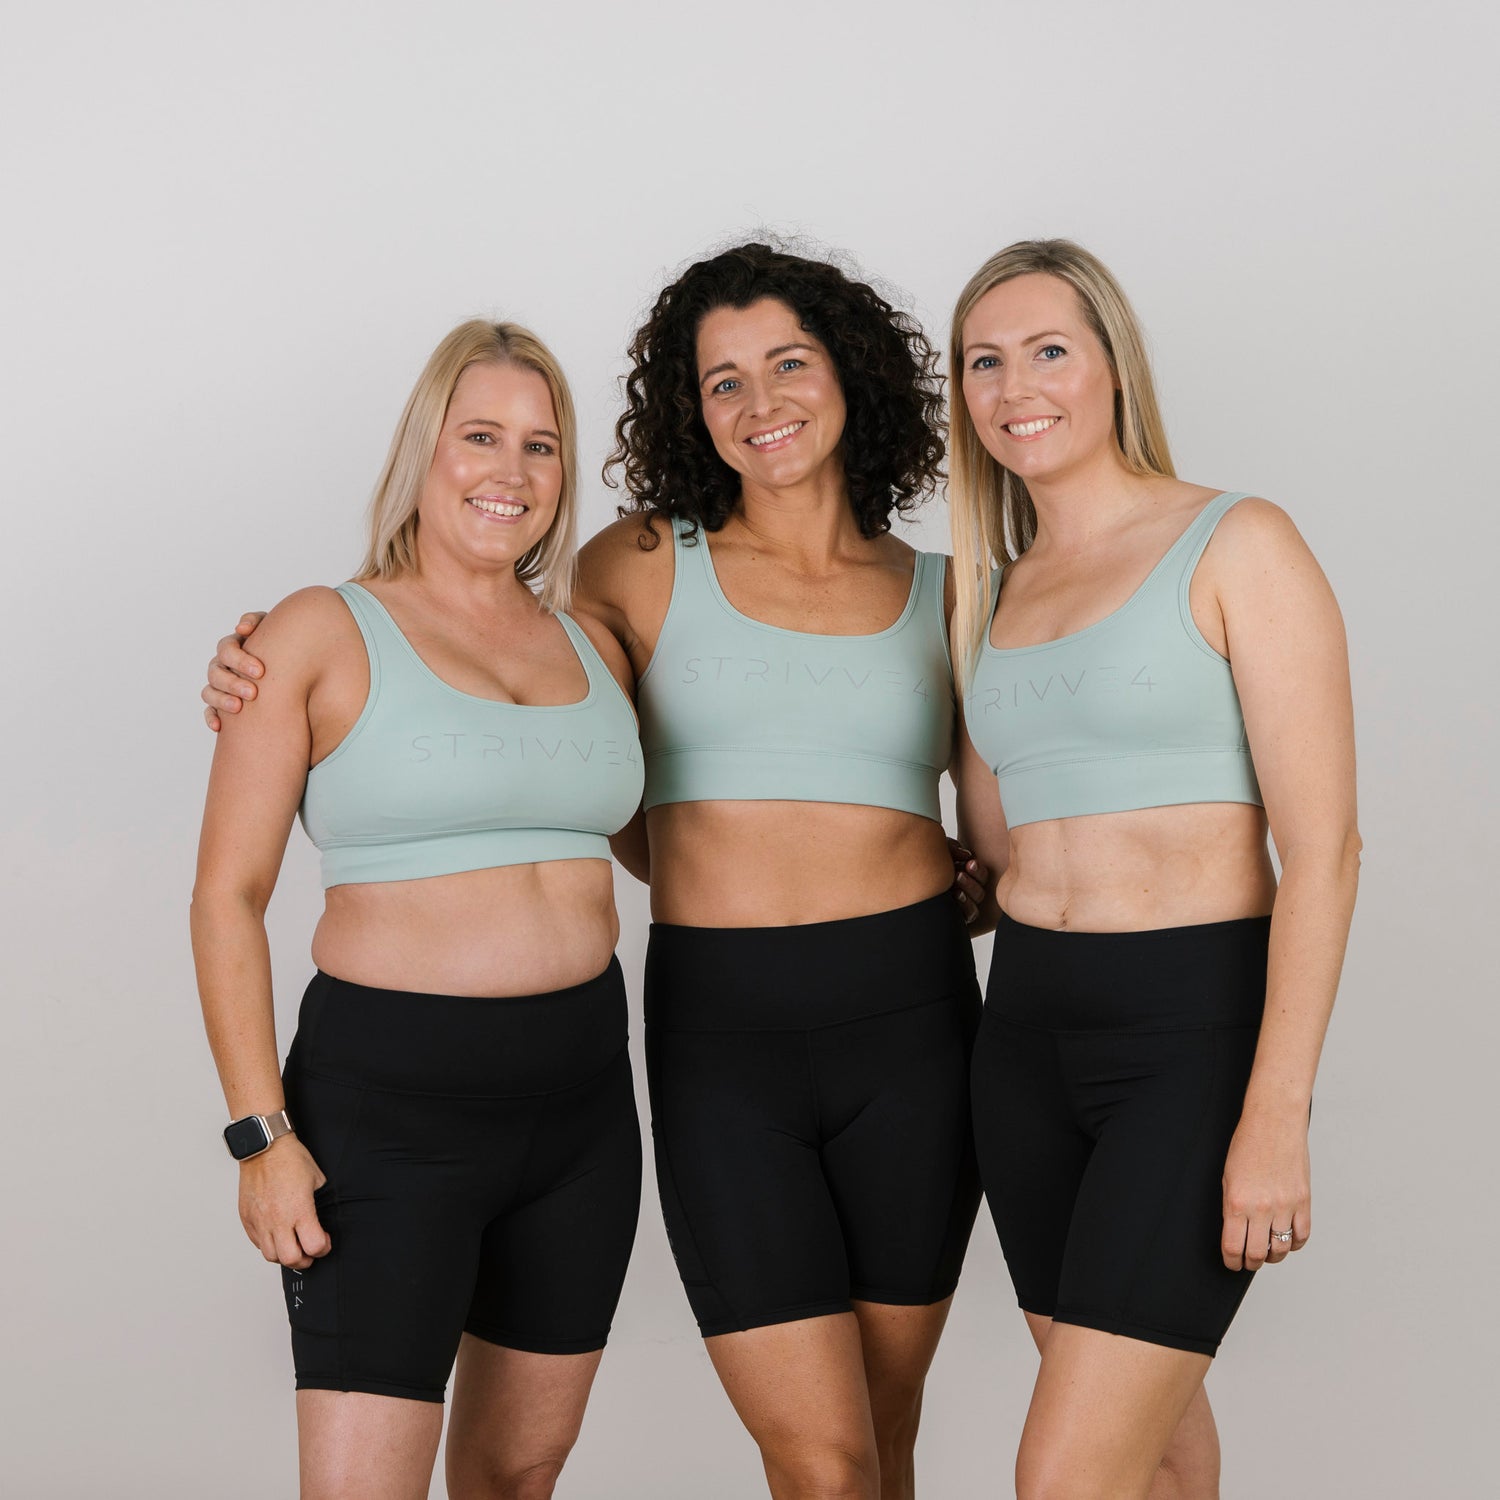 Incognito Tab - Women's Crop Top – Team Full ROM